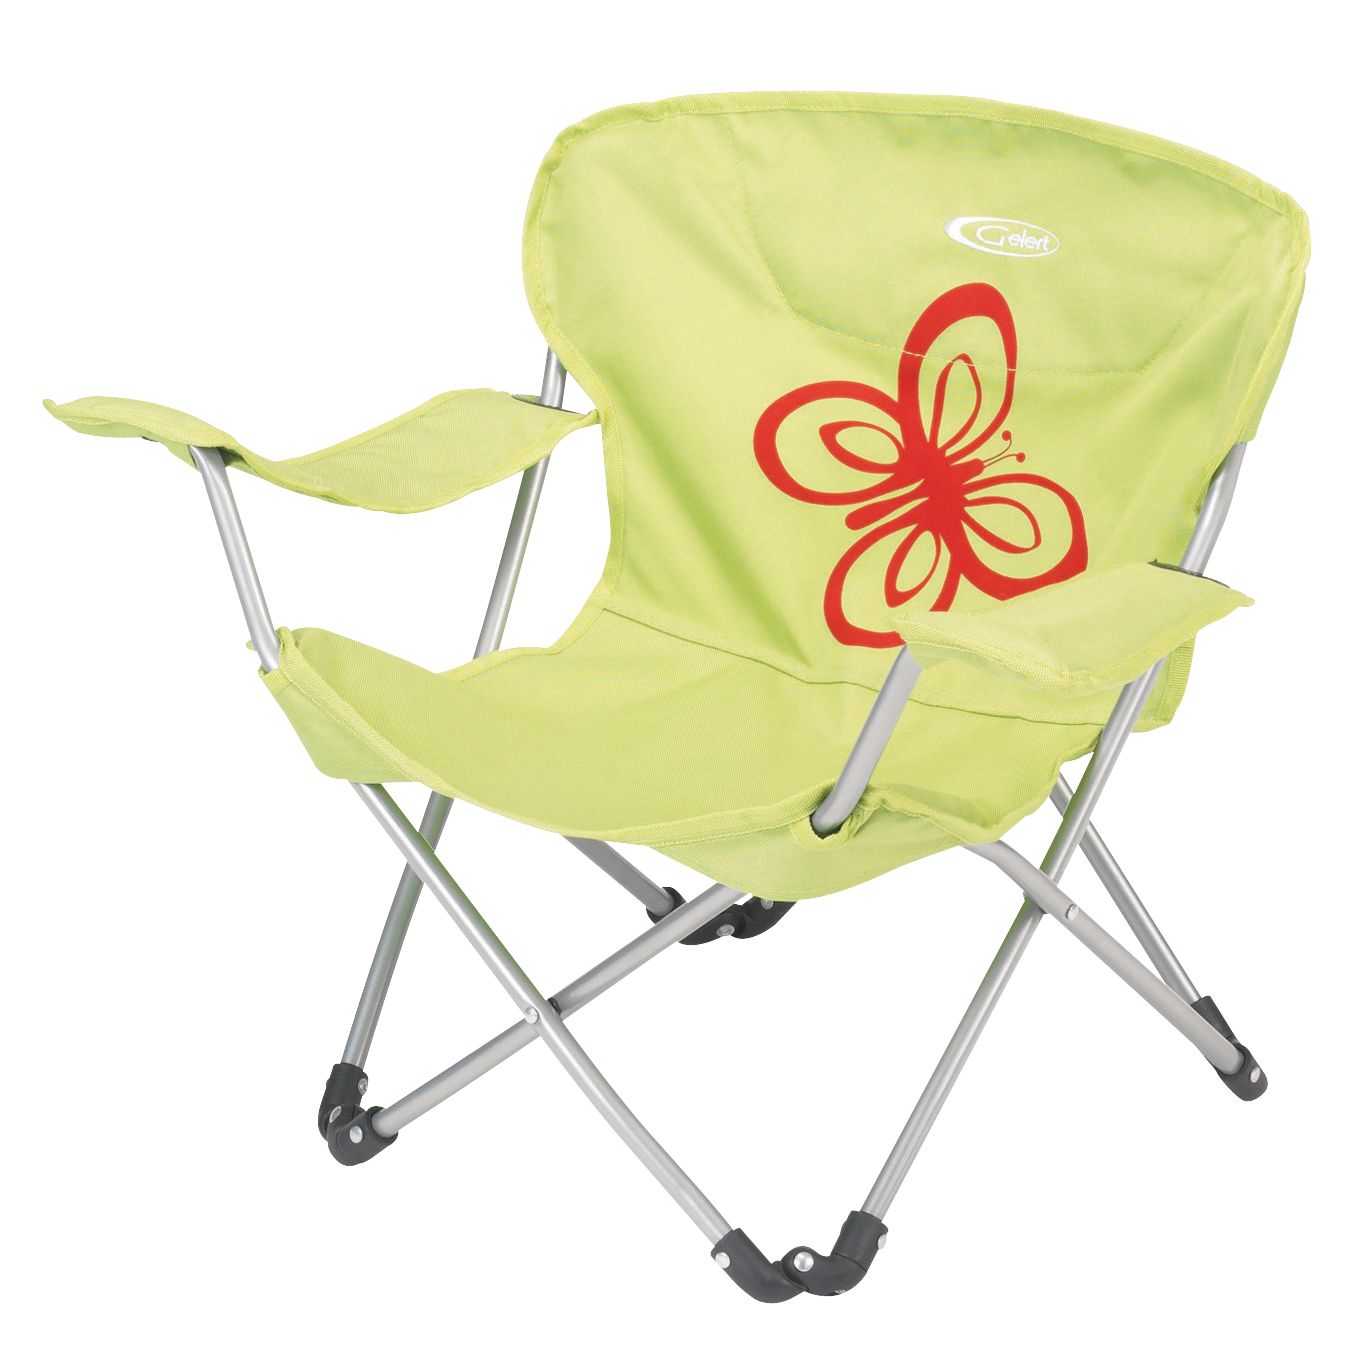 Woodland Jo Tolley Woody Jnr Foldable Chair